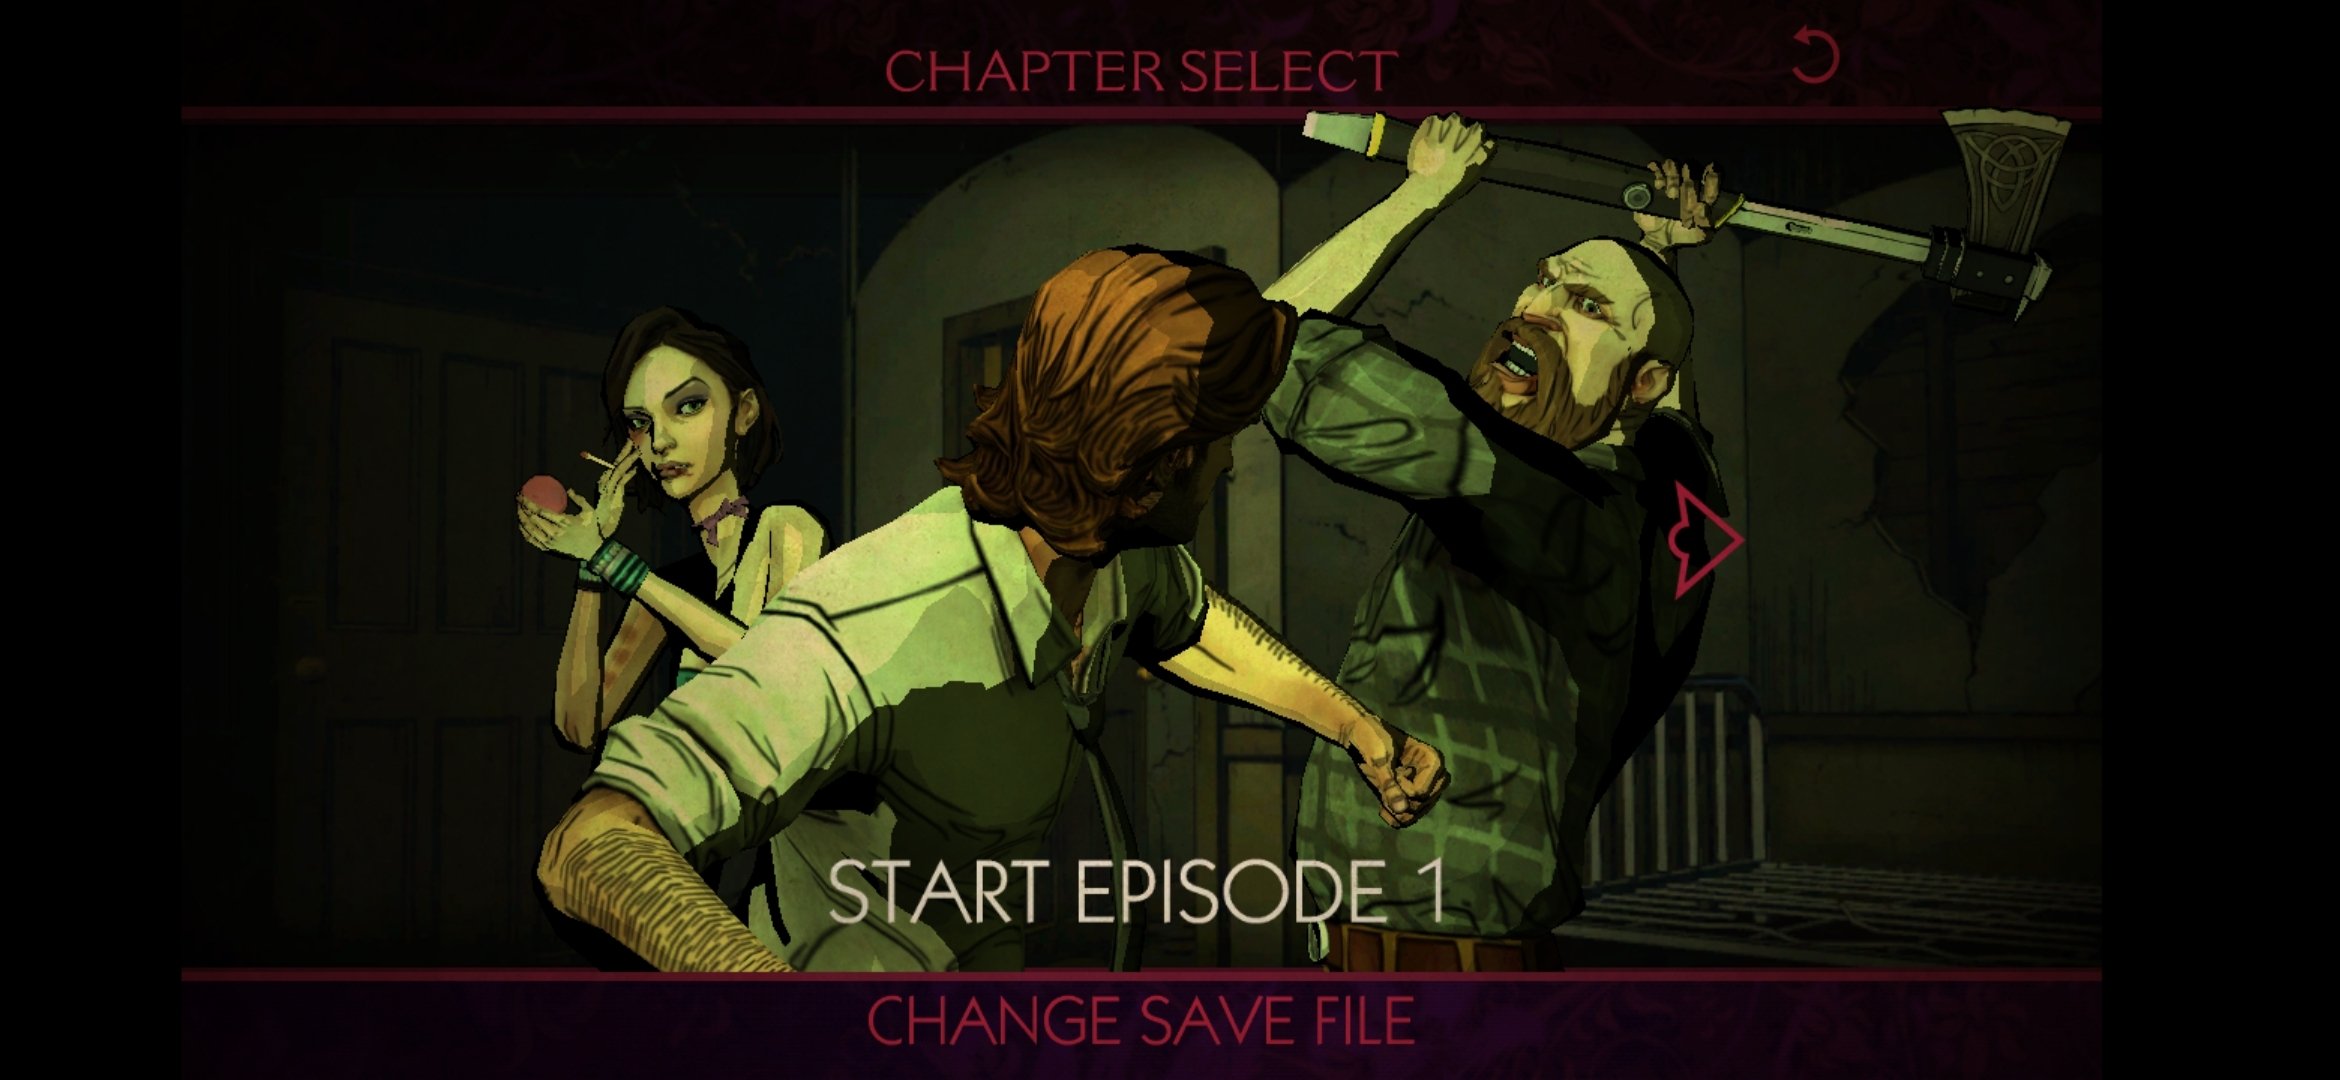 the wolf among us game download